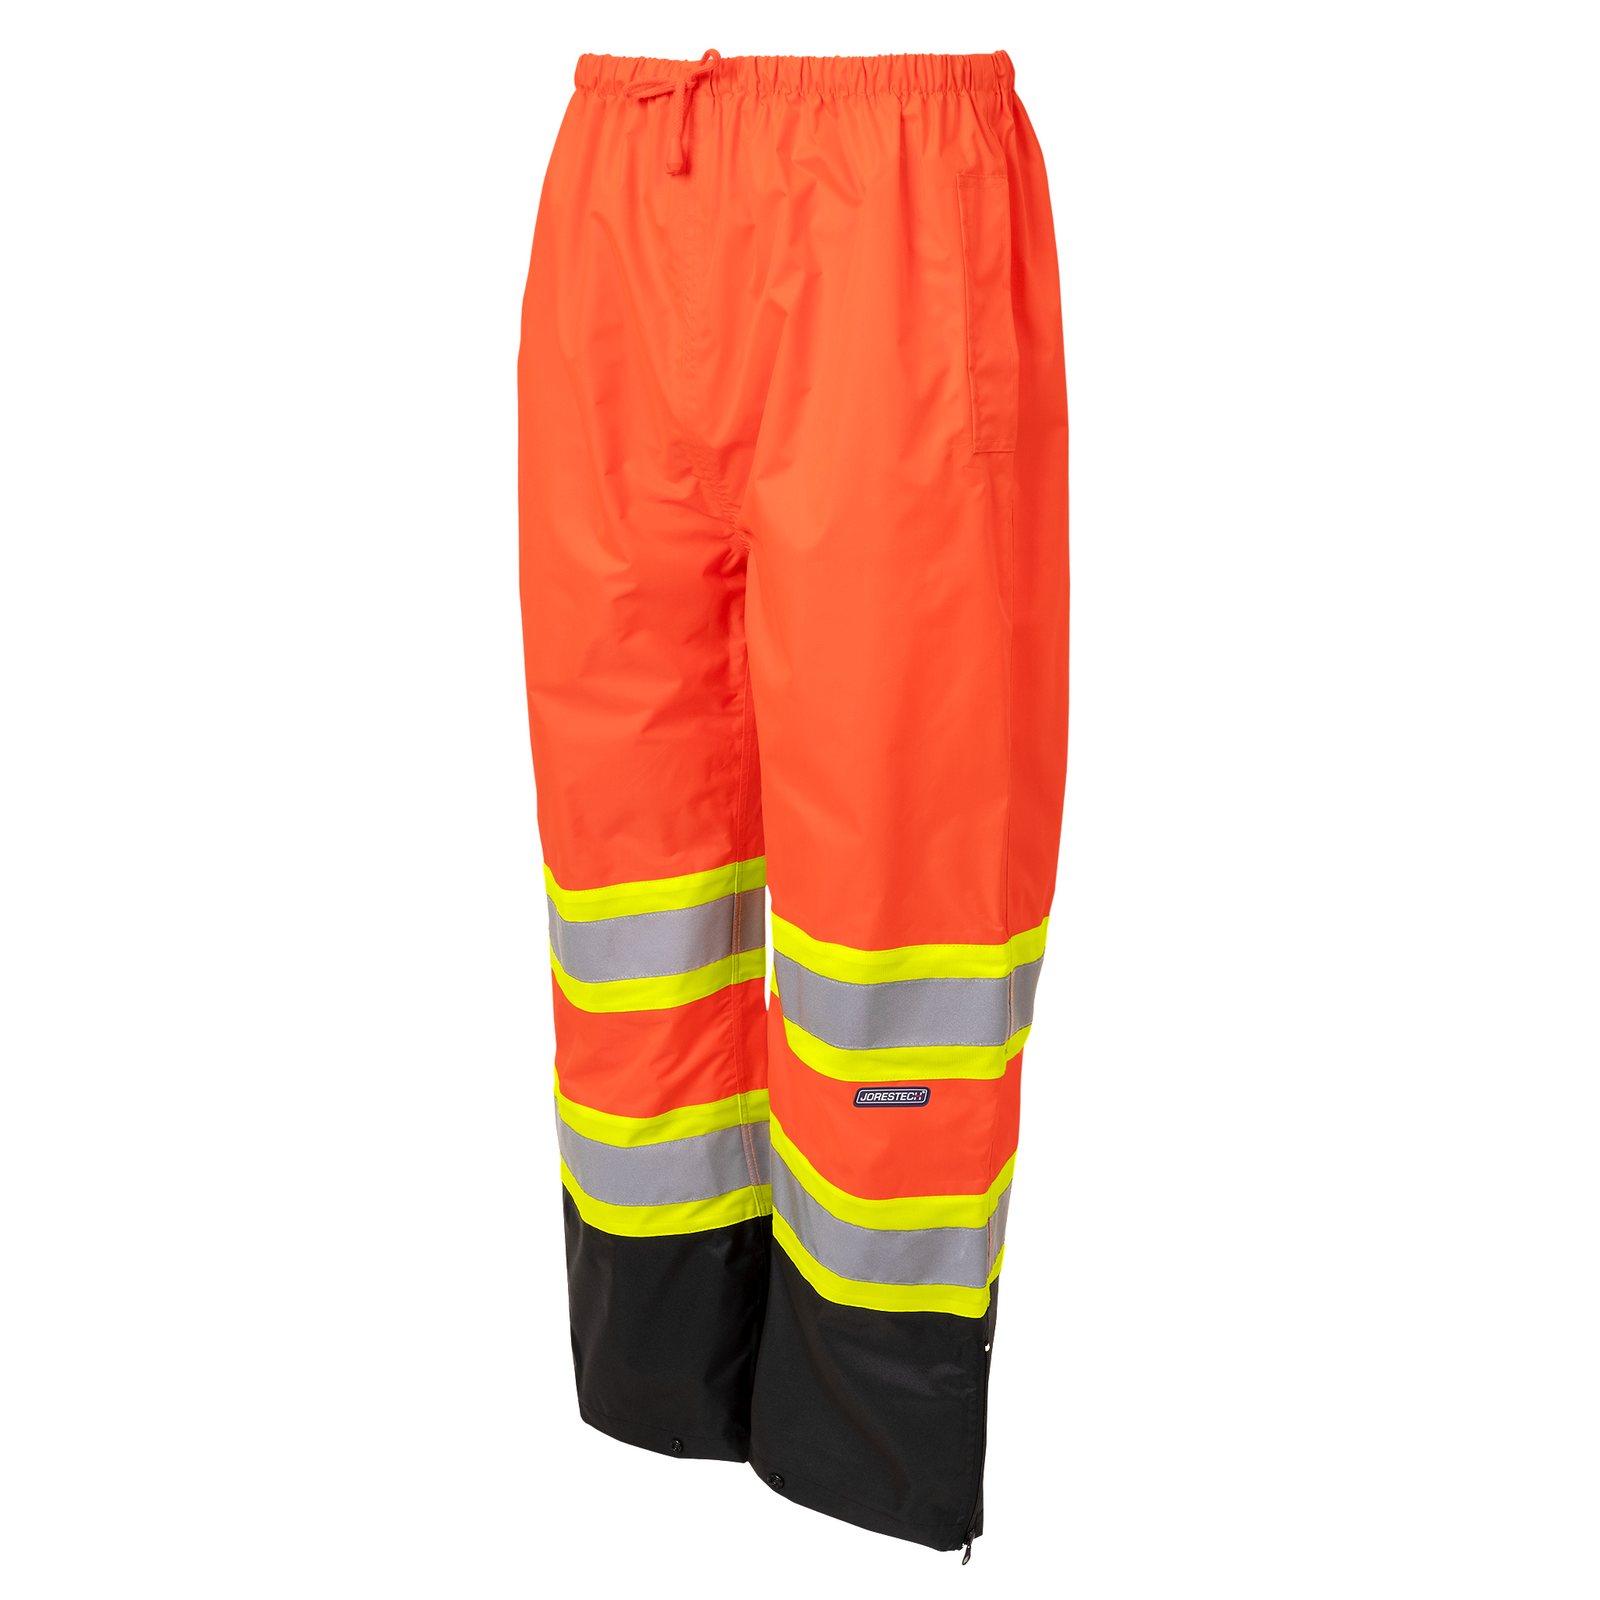 ANSI compliant safety rain pants with reflective stripes